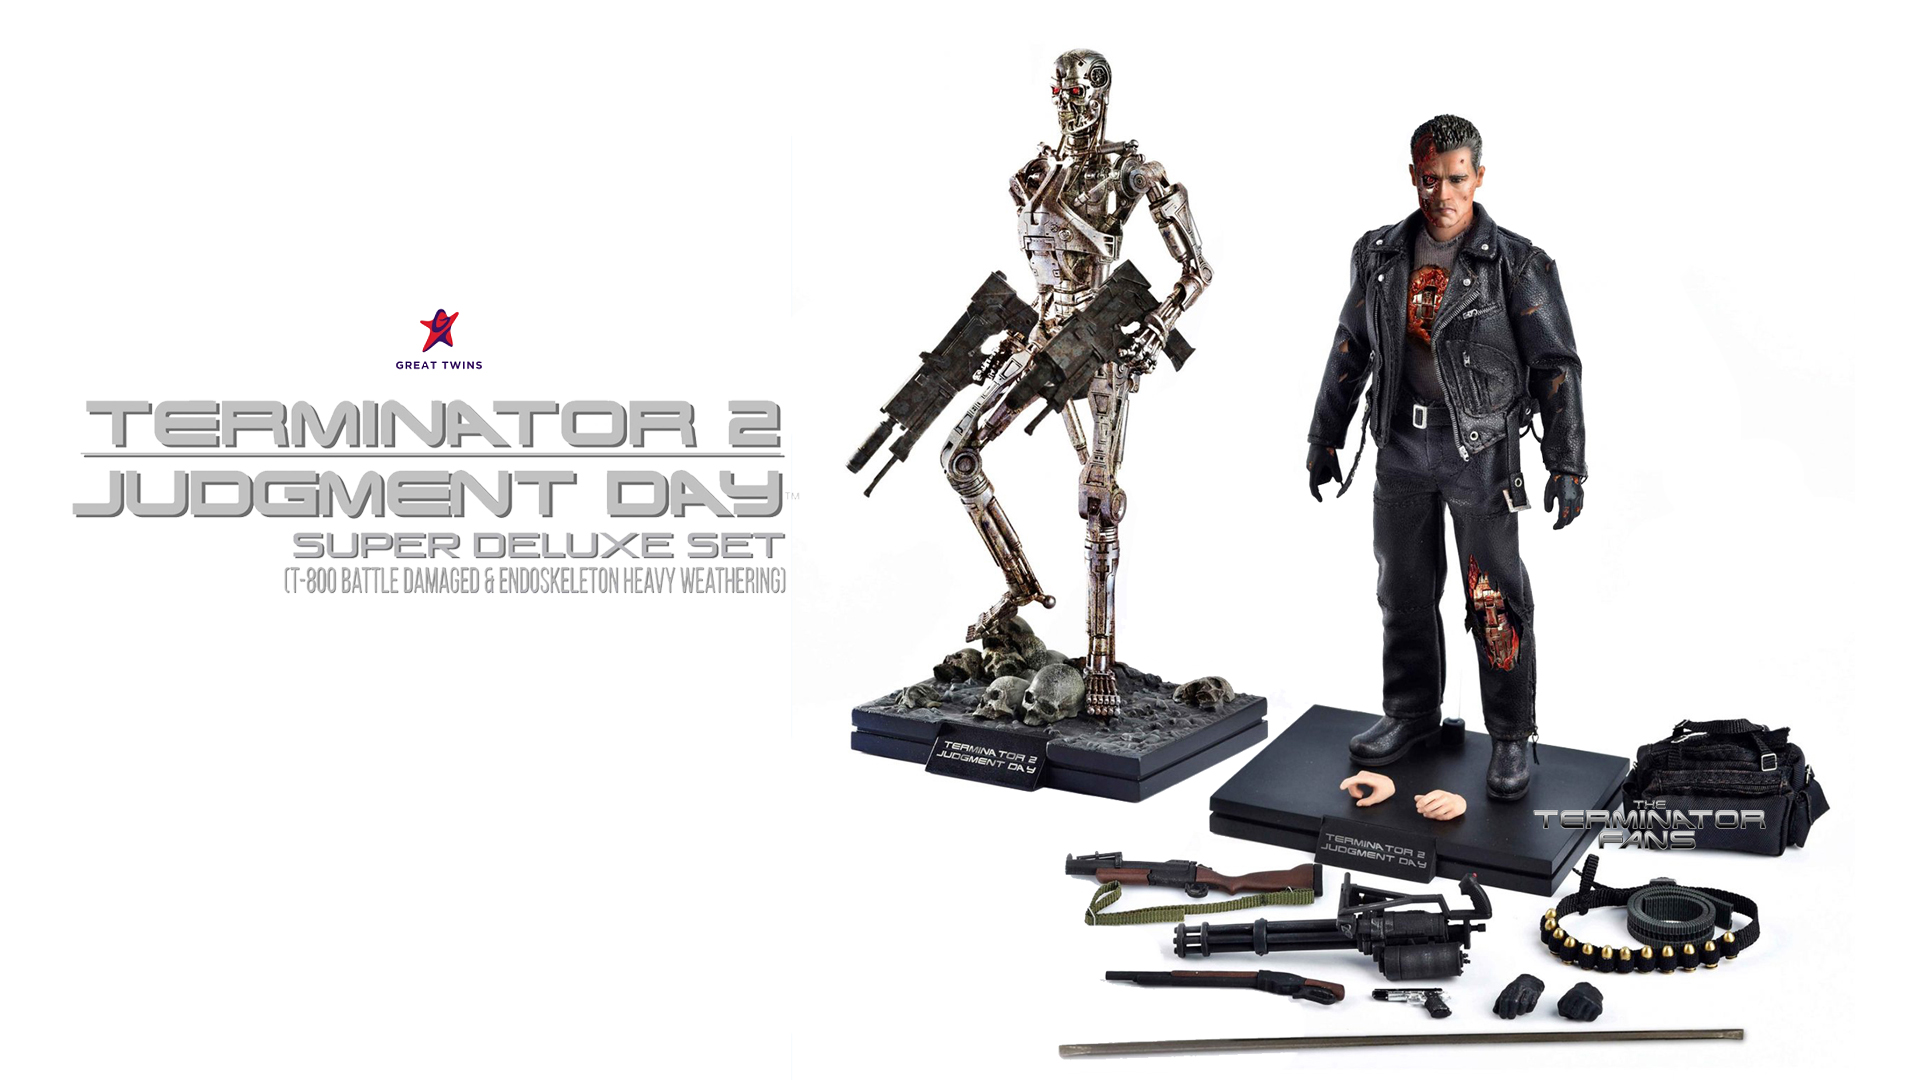 TERMINATOR JUDGMENT DAY T CSM Endoskeleton SUPER DELUXE SET By GREAT TWINS